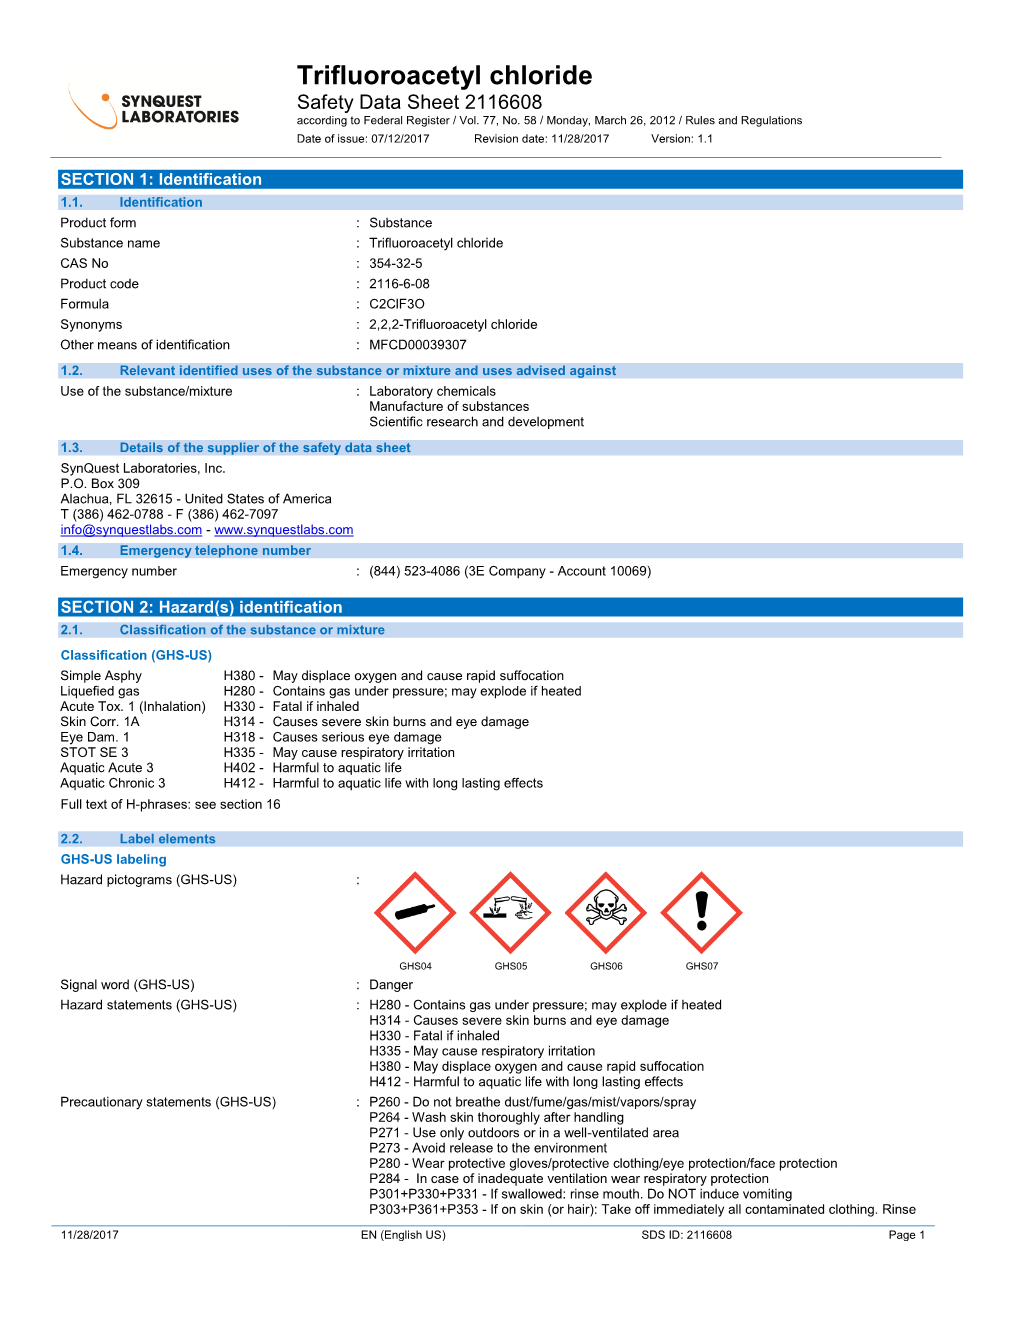 Trifluoroacetyl Chloride Safety Data Sheet 2116608 According to Federal Register / Vol